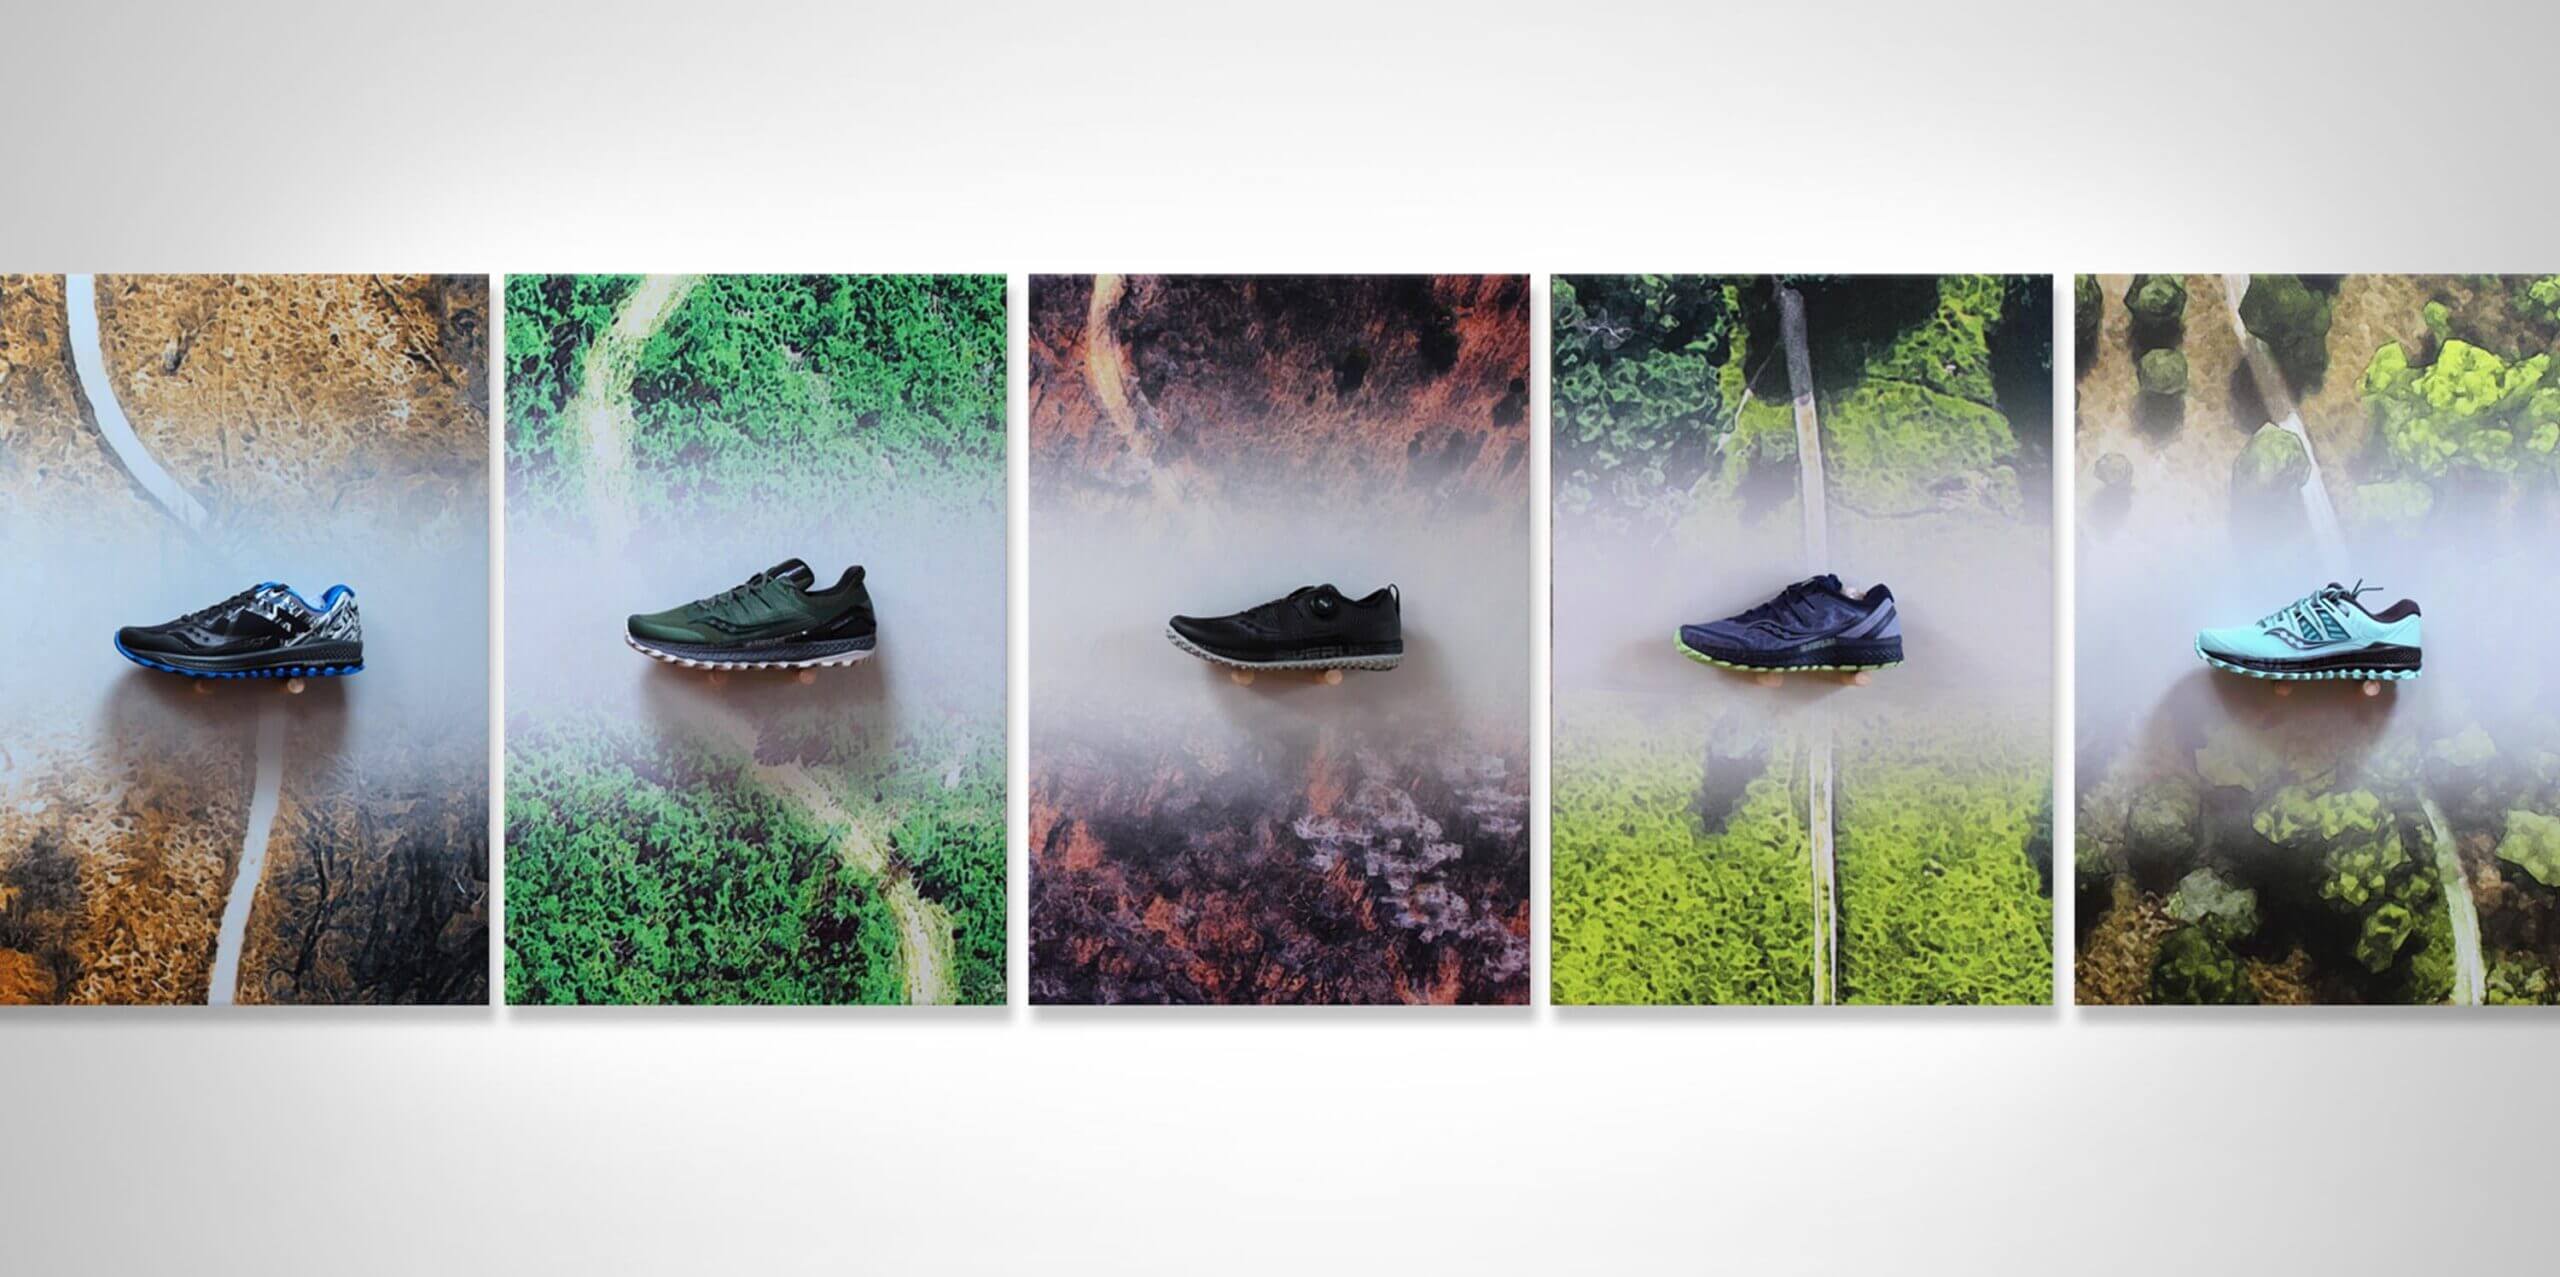 Five sneakers displayed on wall hangings of trails that go through different terrains